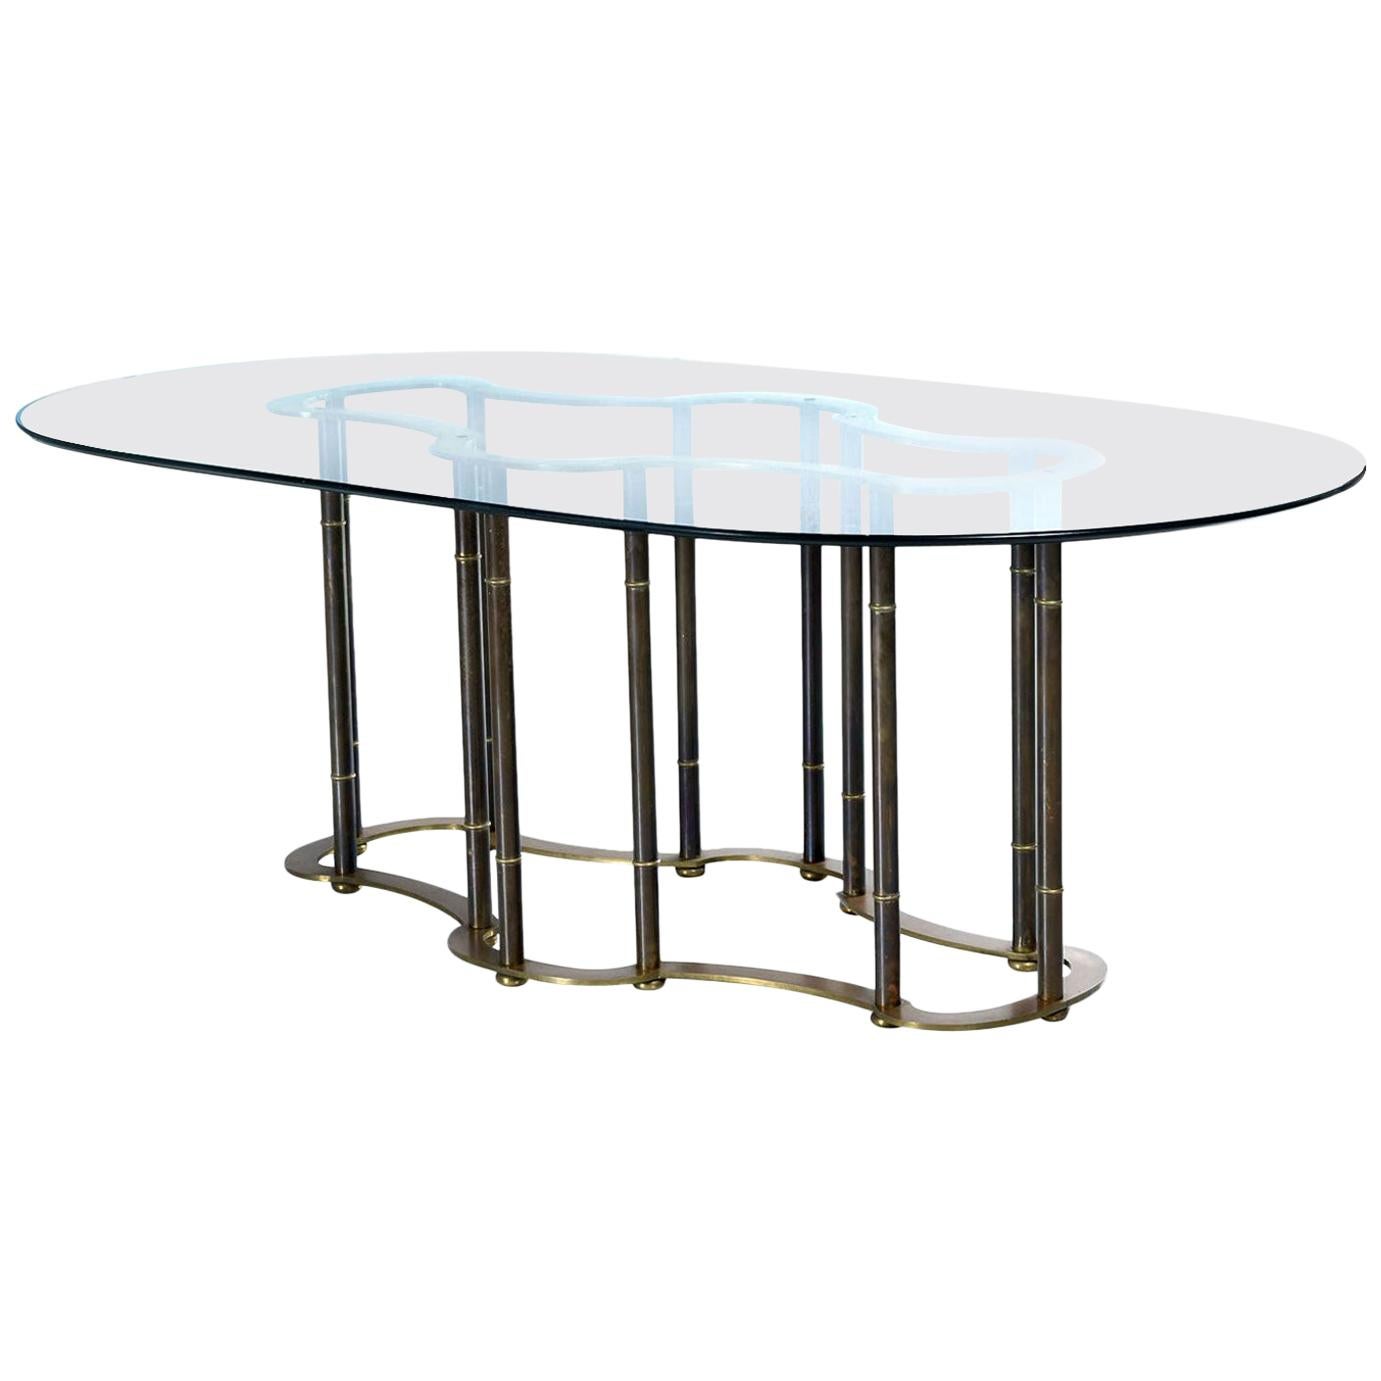 This expertly embodied faux bamboo brass dining table proudly wears its over four decade old patina. The patina gives the otherwise gold colored brass a dark, black bamboo look. The top of the table pedestal resembles a racetrack. The undulating